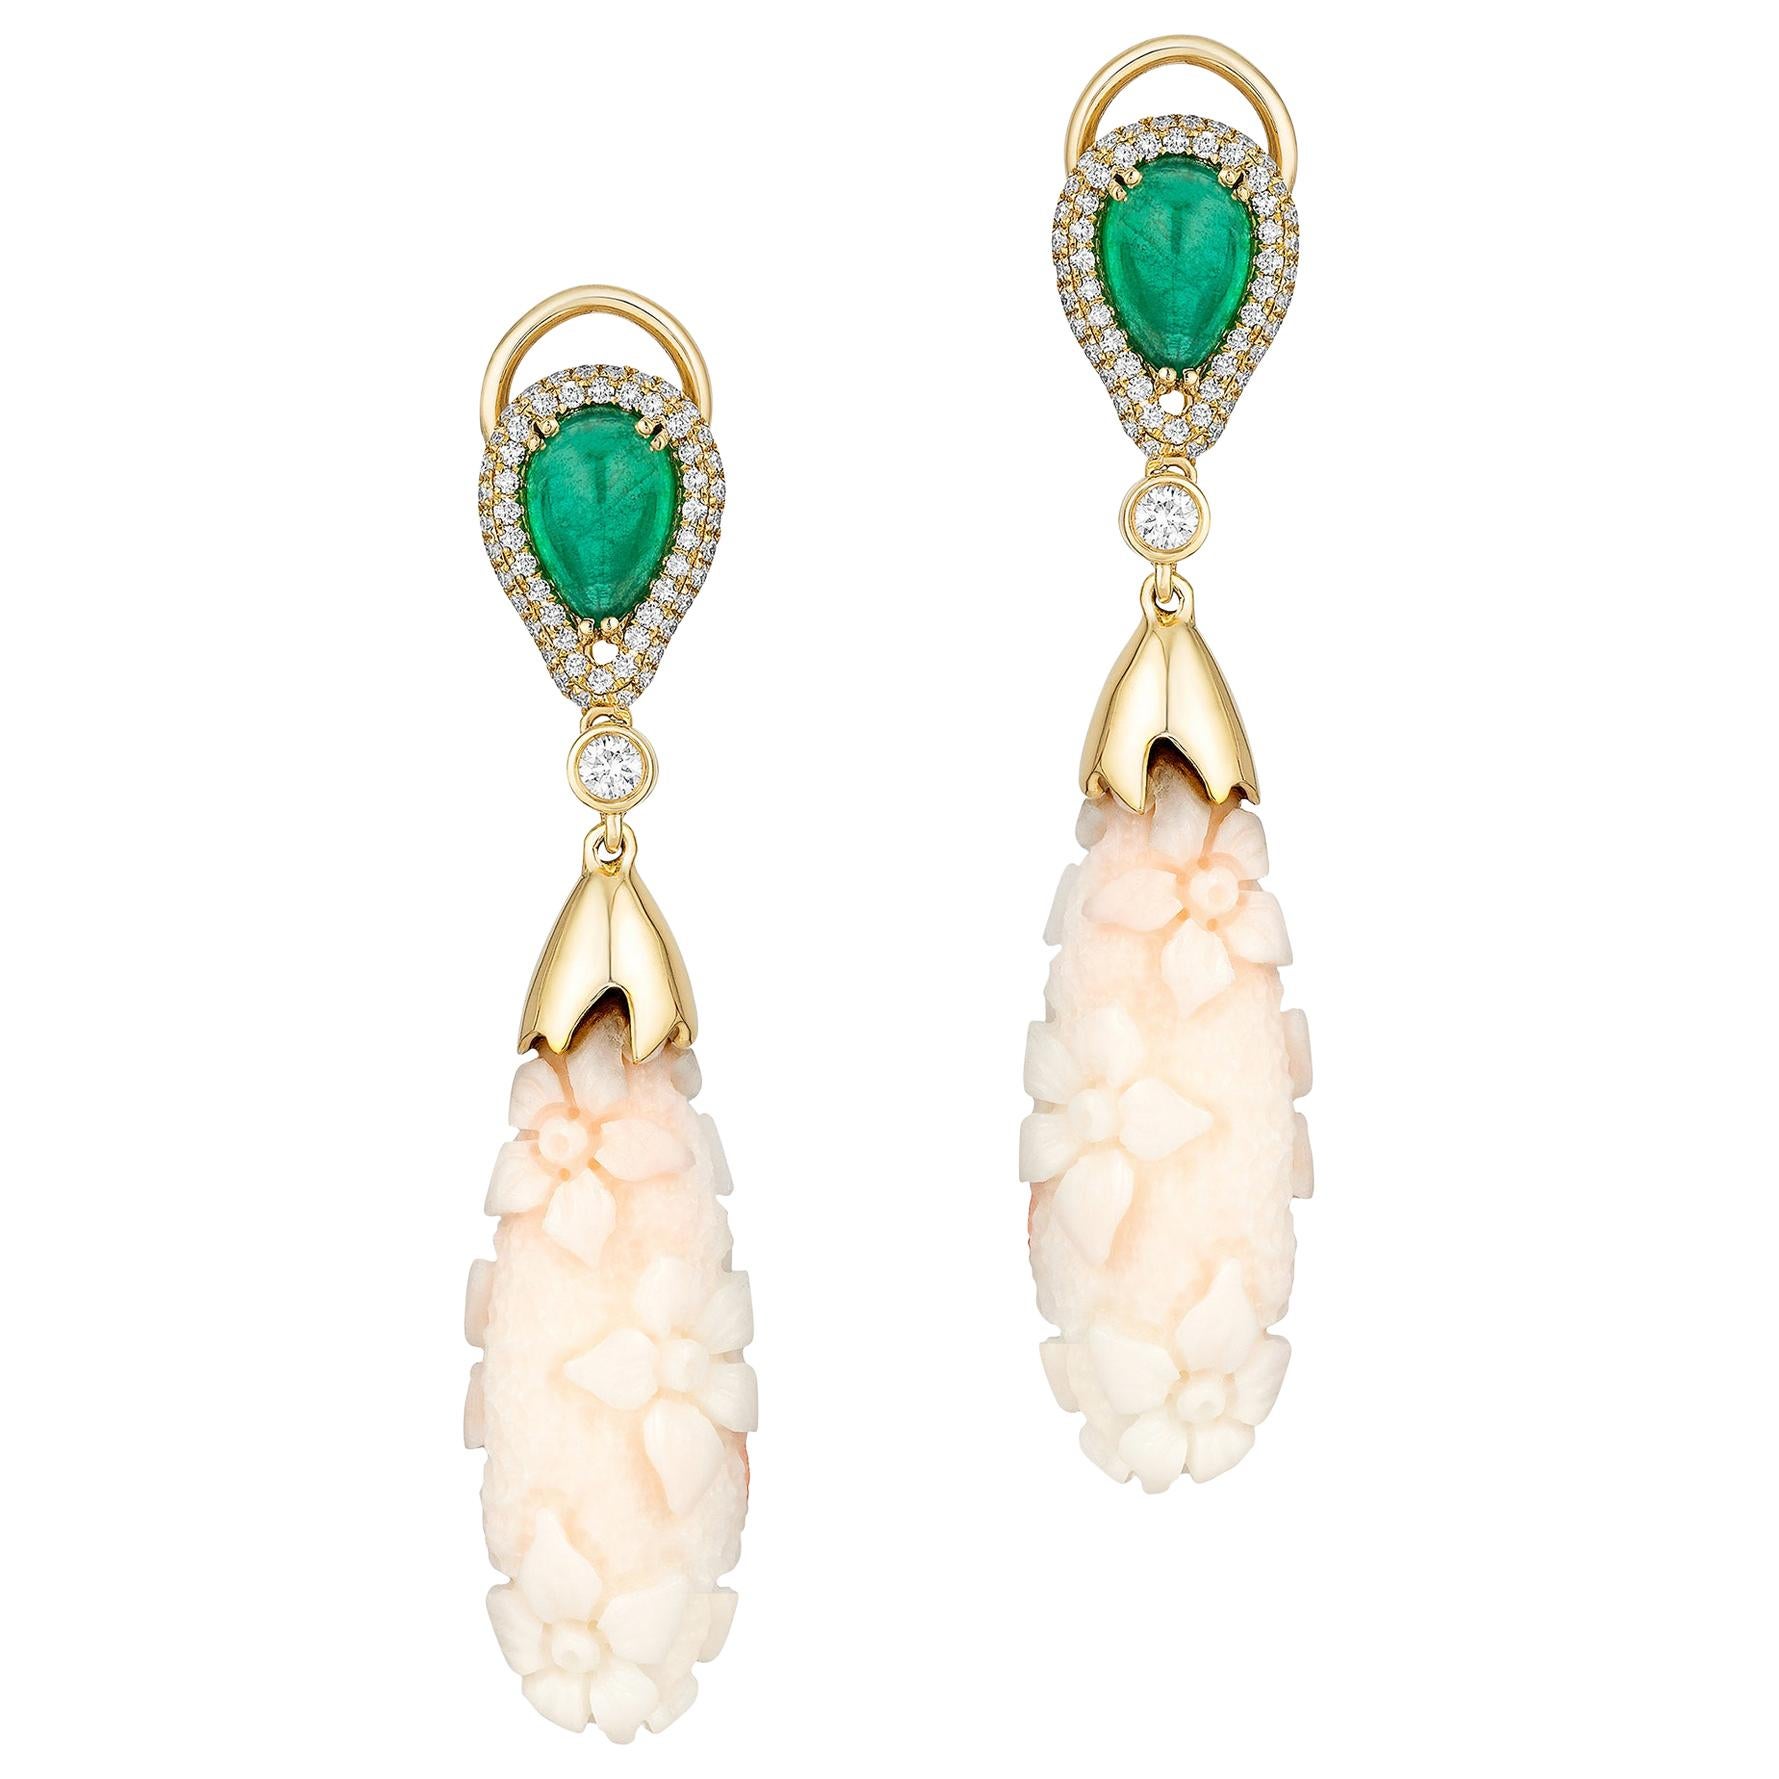 Goshwara Engraved White Coral Flower with Emerald and Diamond Earrings For Sale